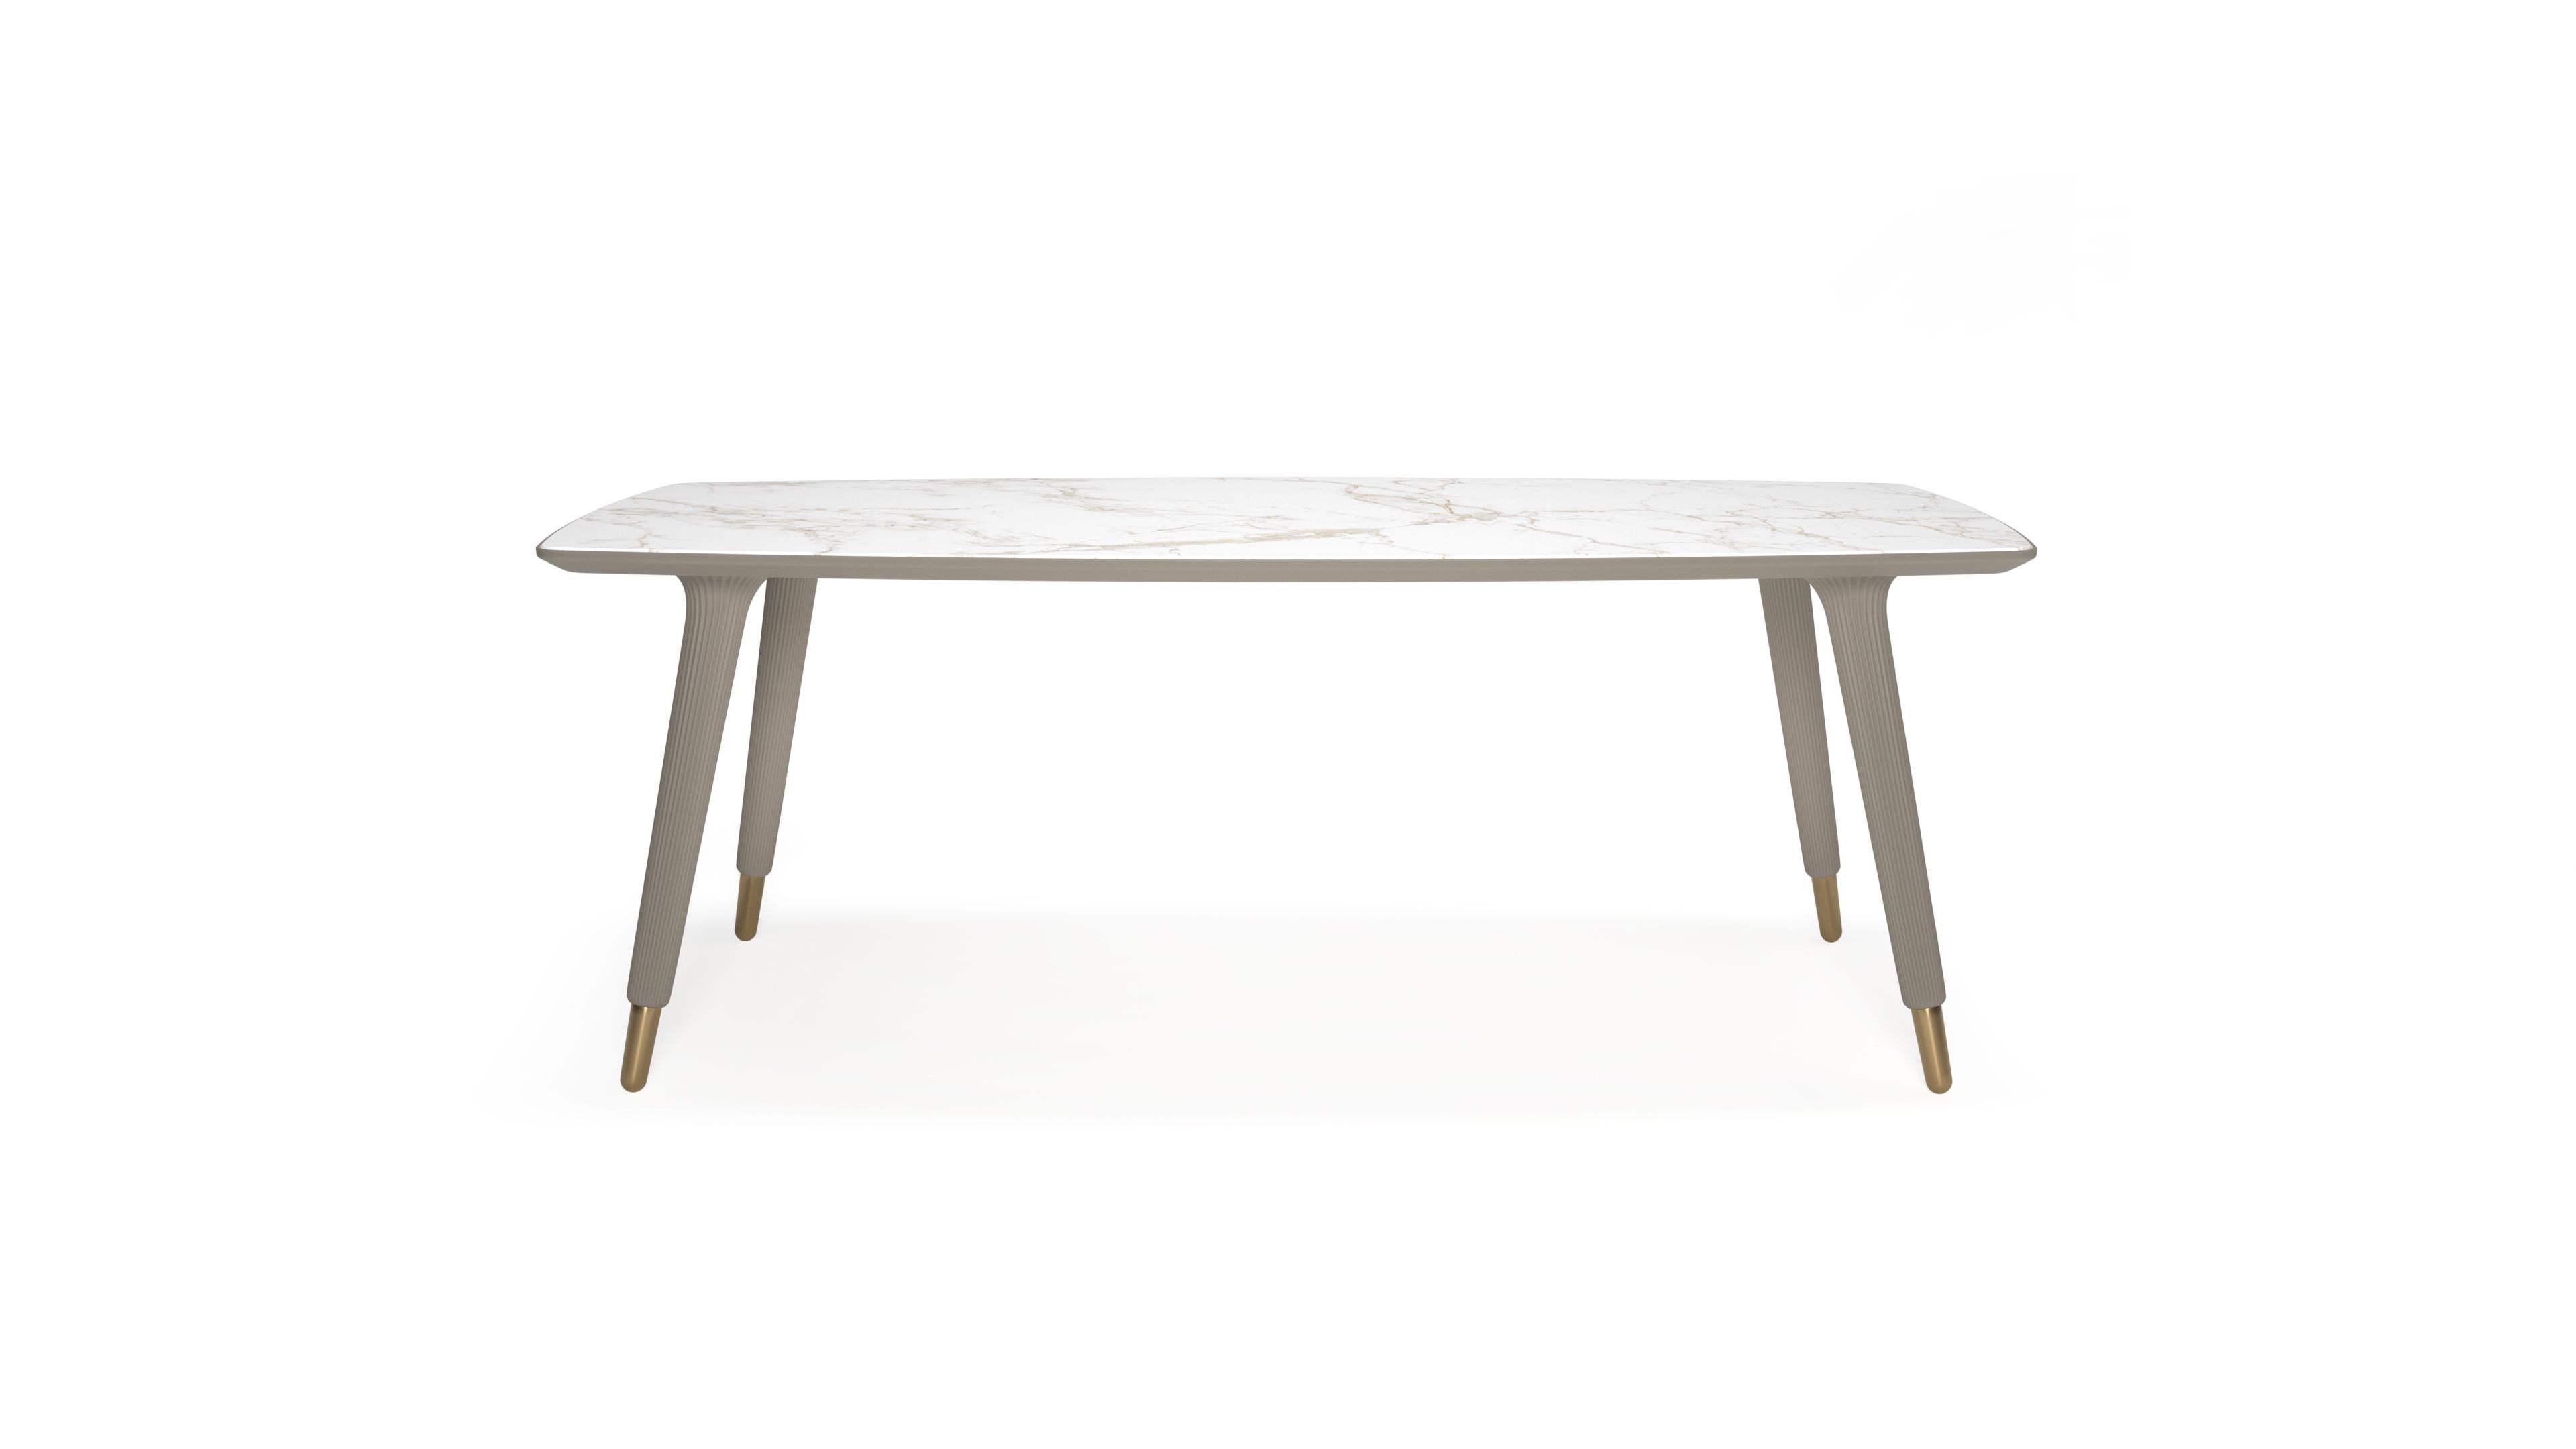 Eleanor Rectangular Dining Table

The Eleanor dining table is a piece of furniture  that takes functionality and simplicity of design as its starting point. 
In addition to its feminine curves and the wavy texture of the legs, the gold details on